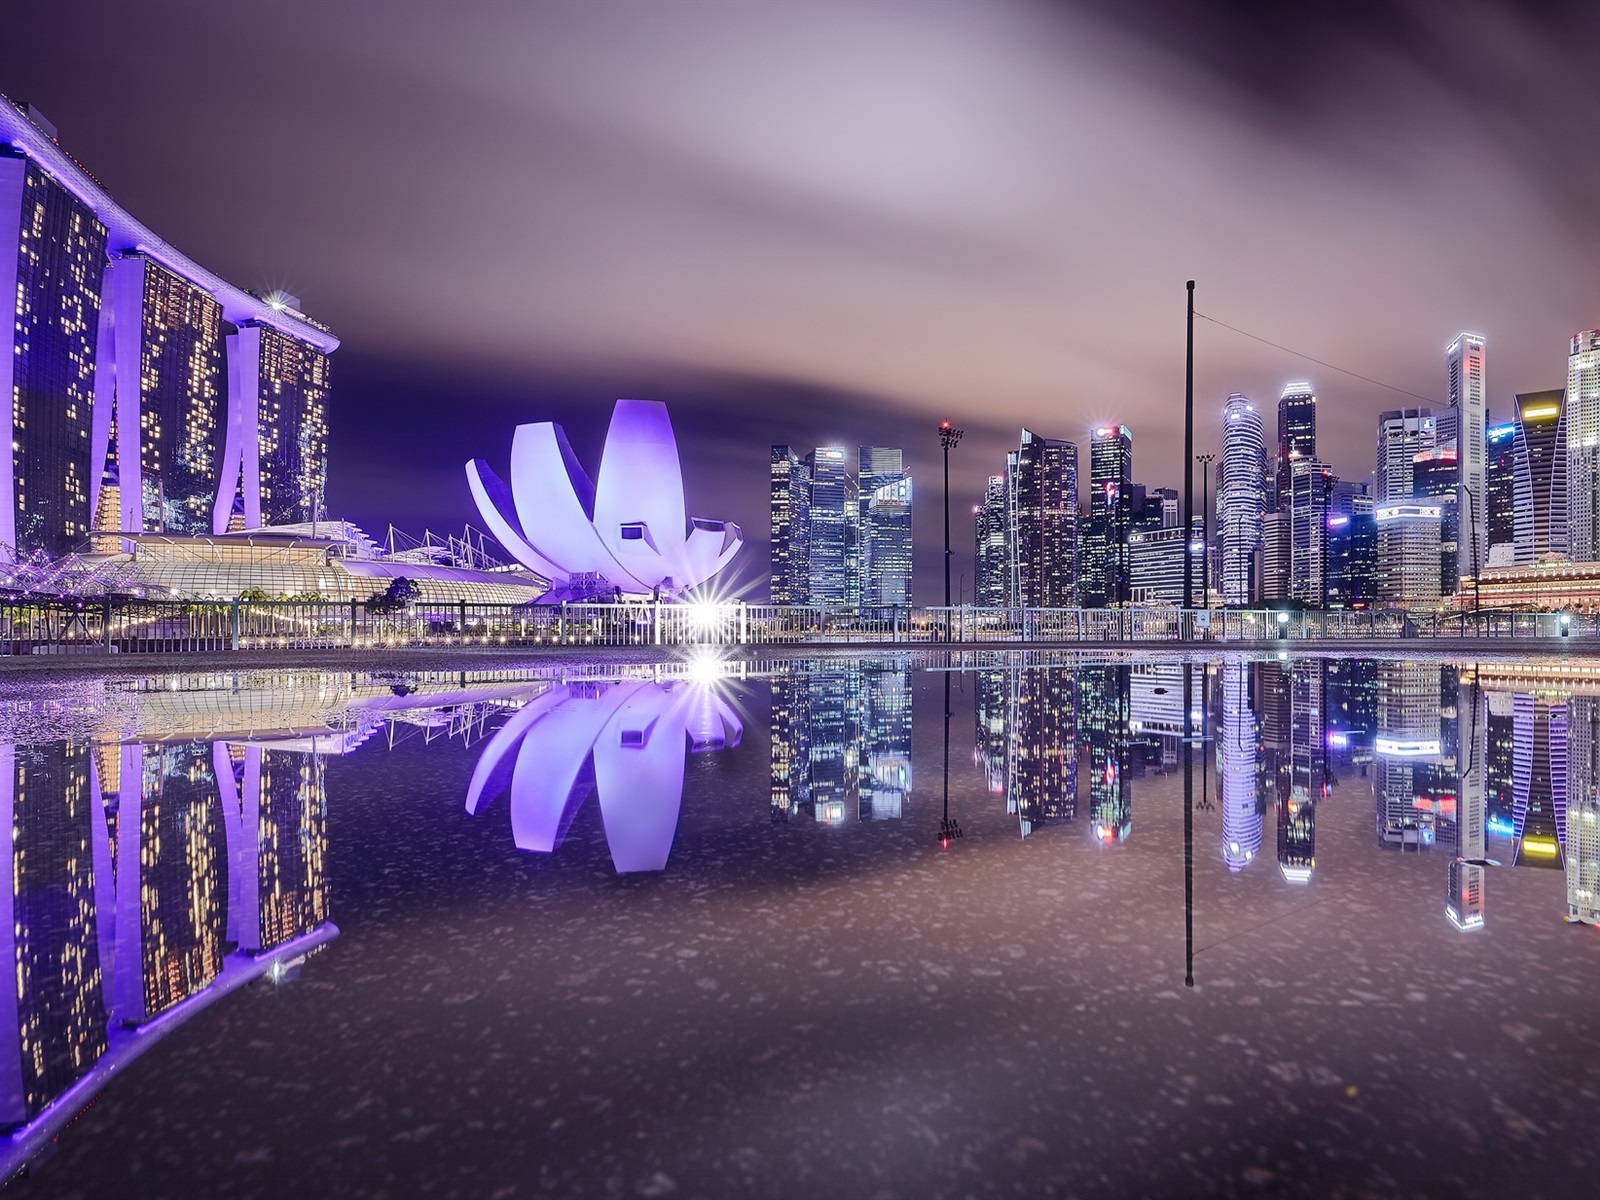 Singapore Nightscape Wallpapers